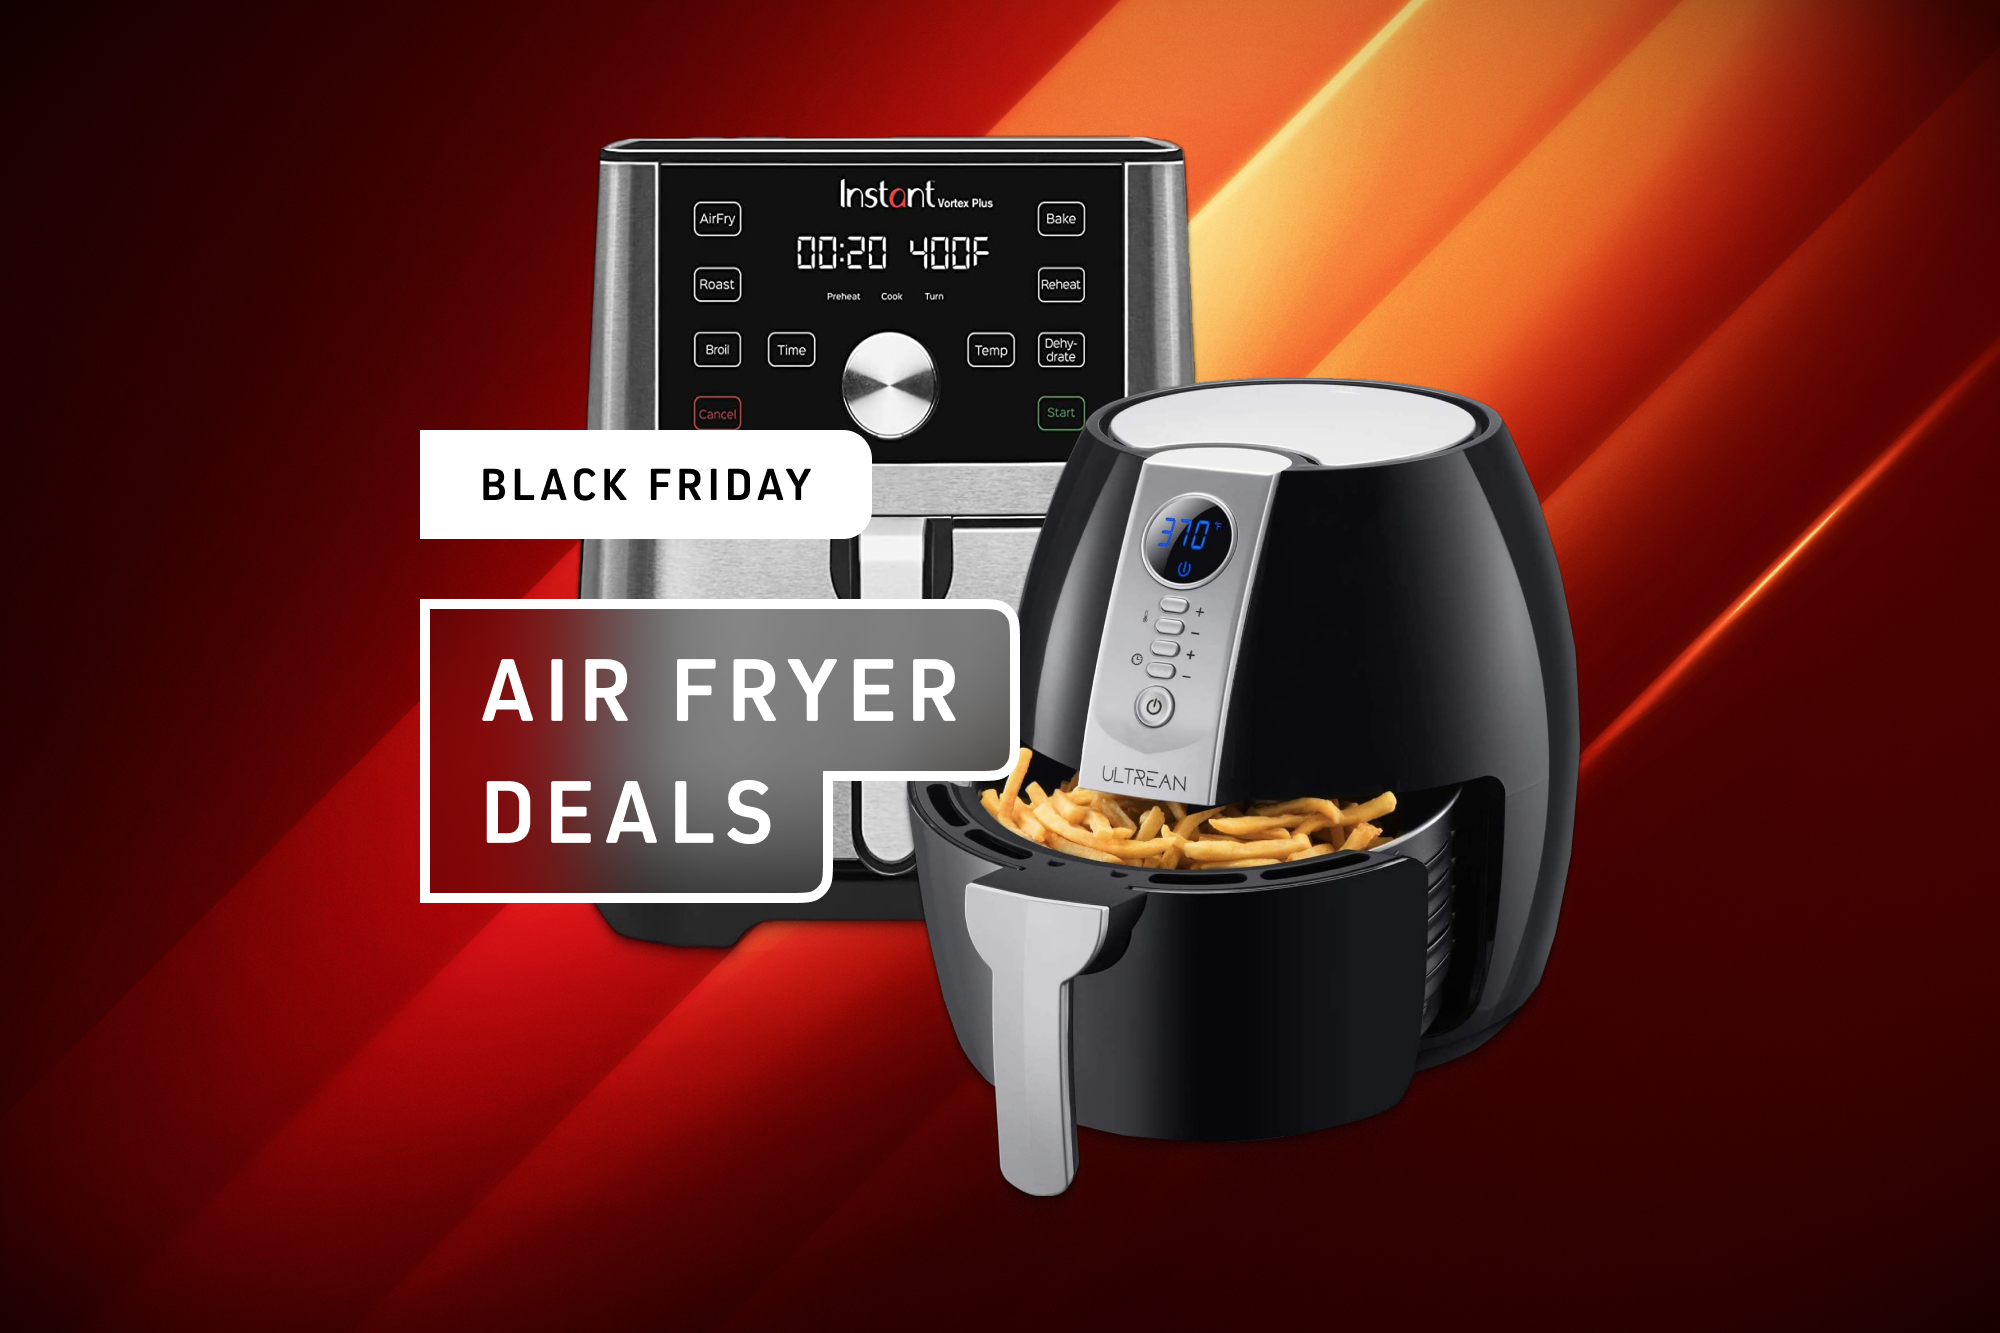 The best Black Friday air fryer deals for 2022